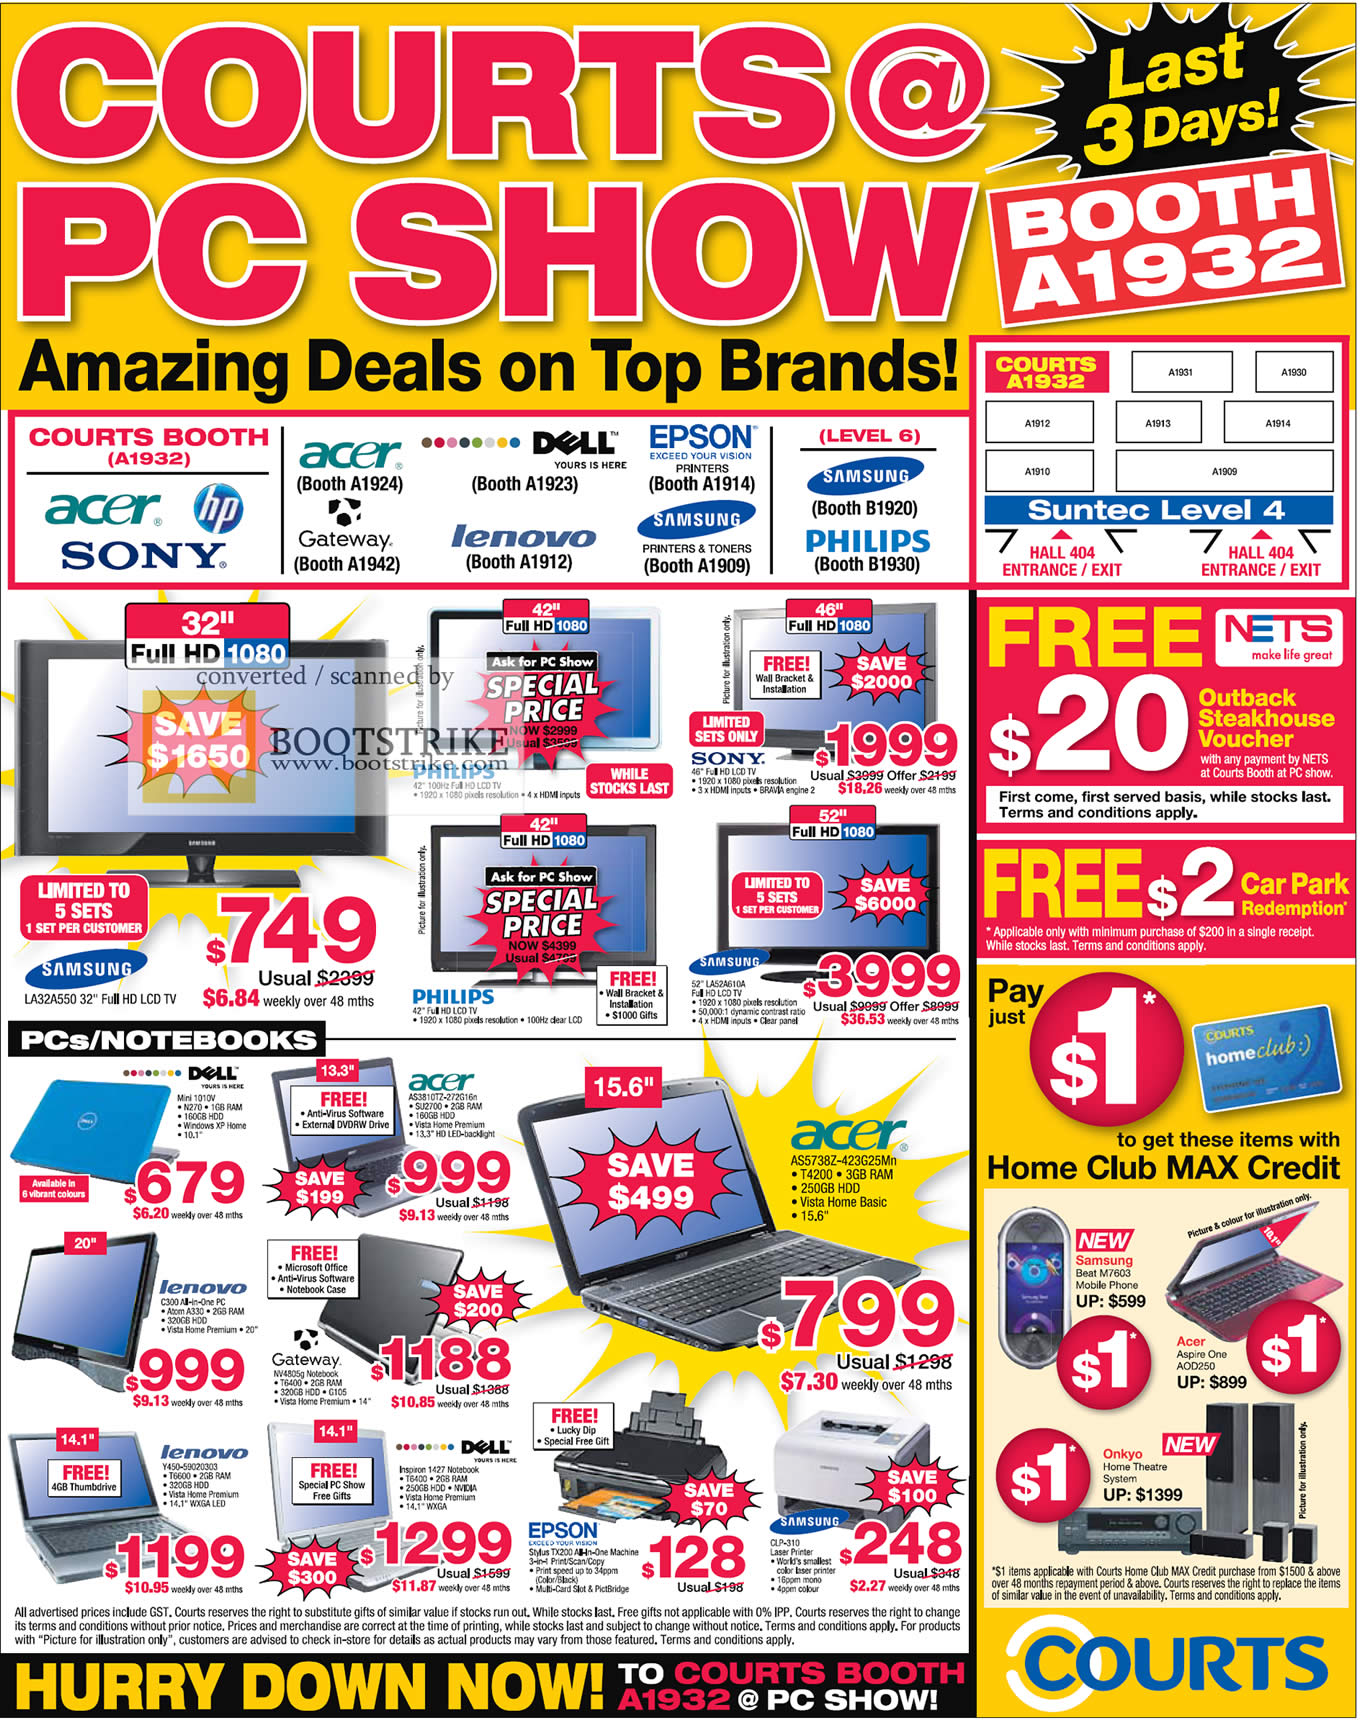 PC Show 2009 price list image brochure of Courts Samsung Acer Dell Lenovo Epson Philips Sony